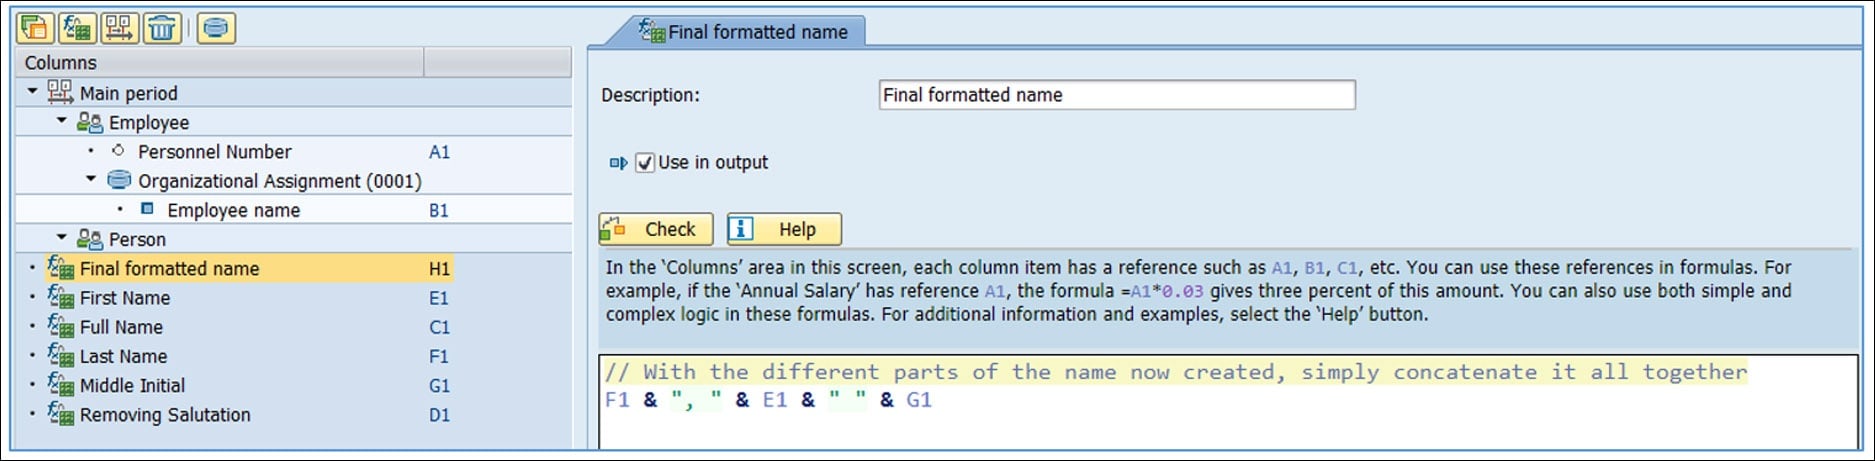 Formula 5: With all the parts of the name now created, bring it all together using a shortcut for the CONCATENATE statement: